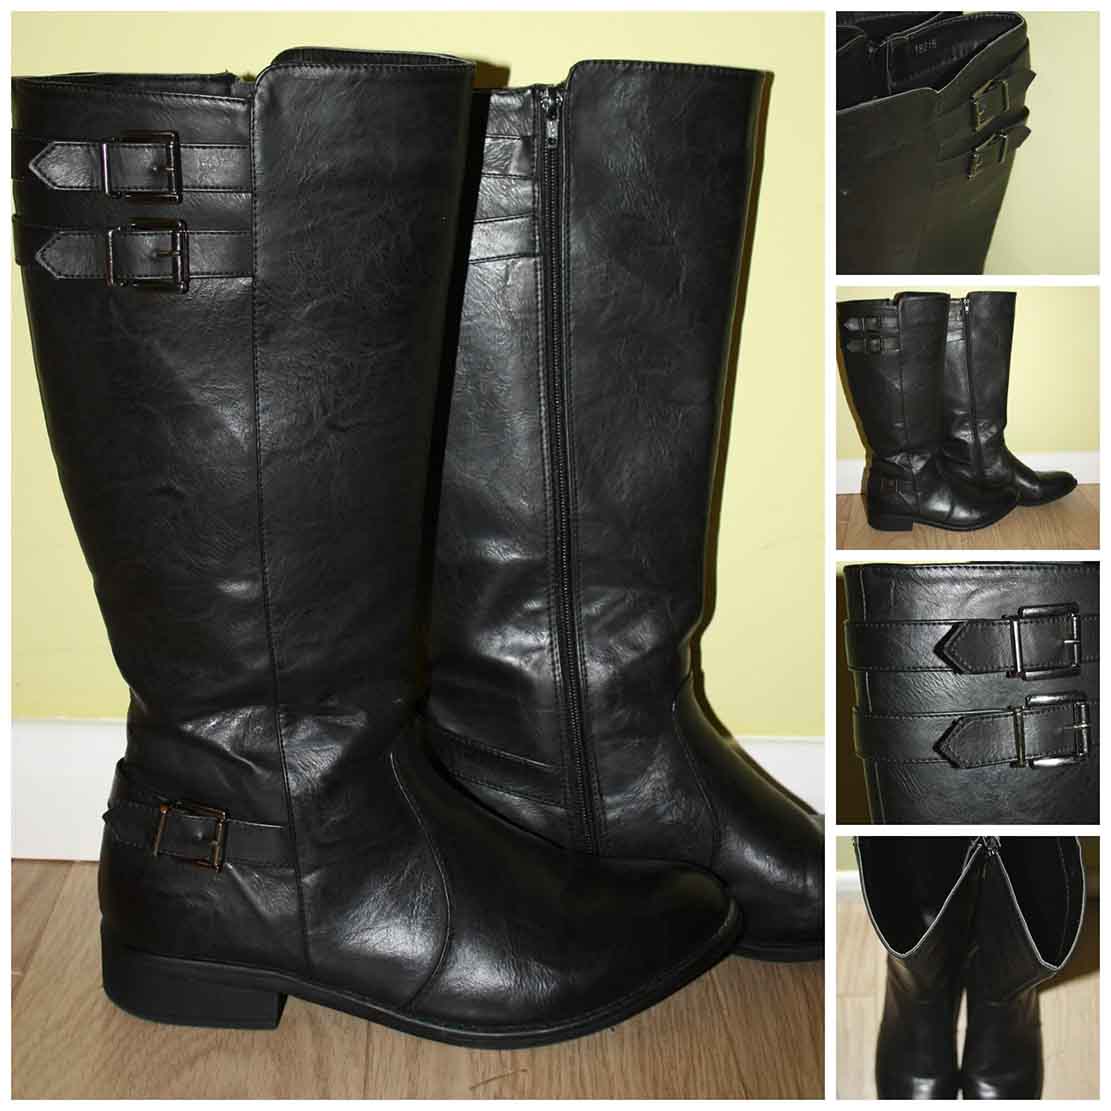 4 pictures of calf black boots with a small heel